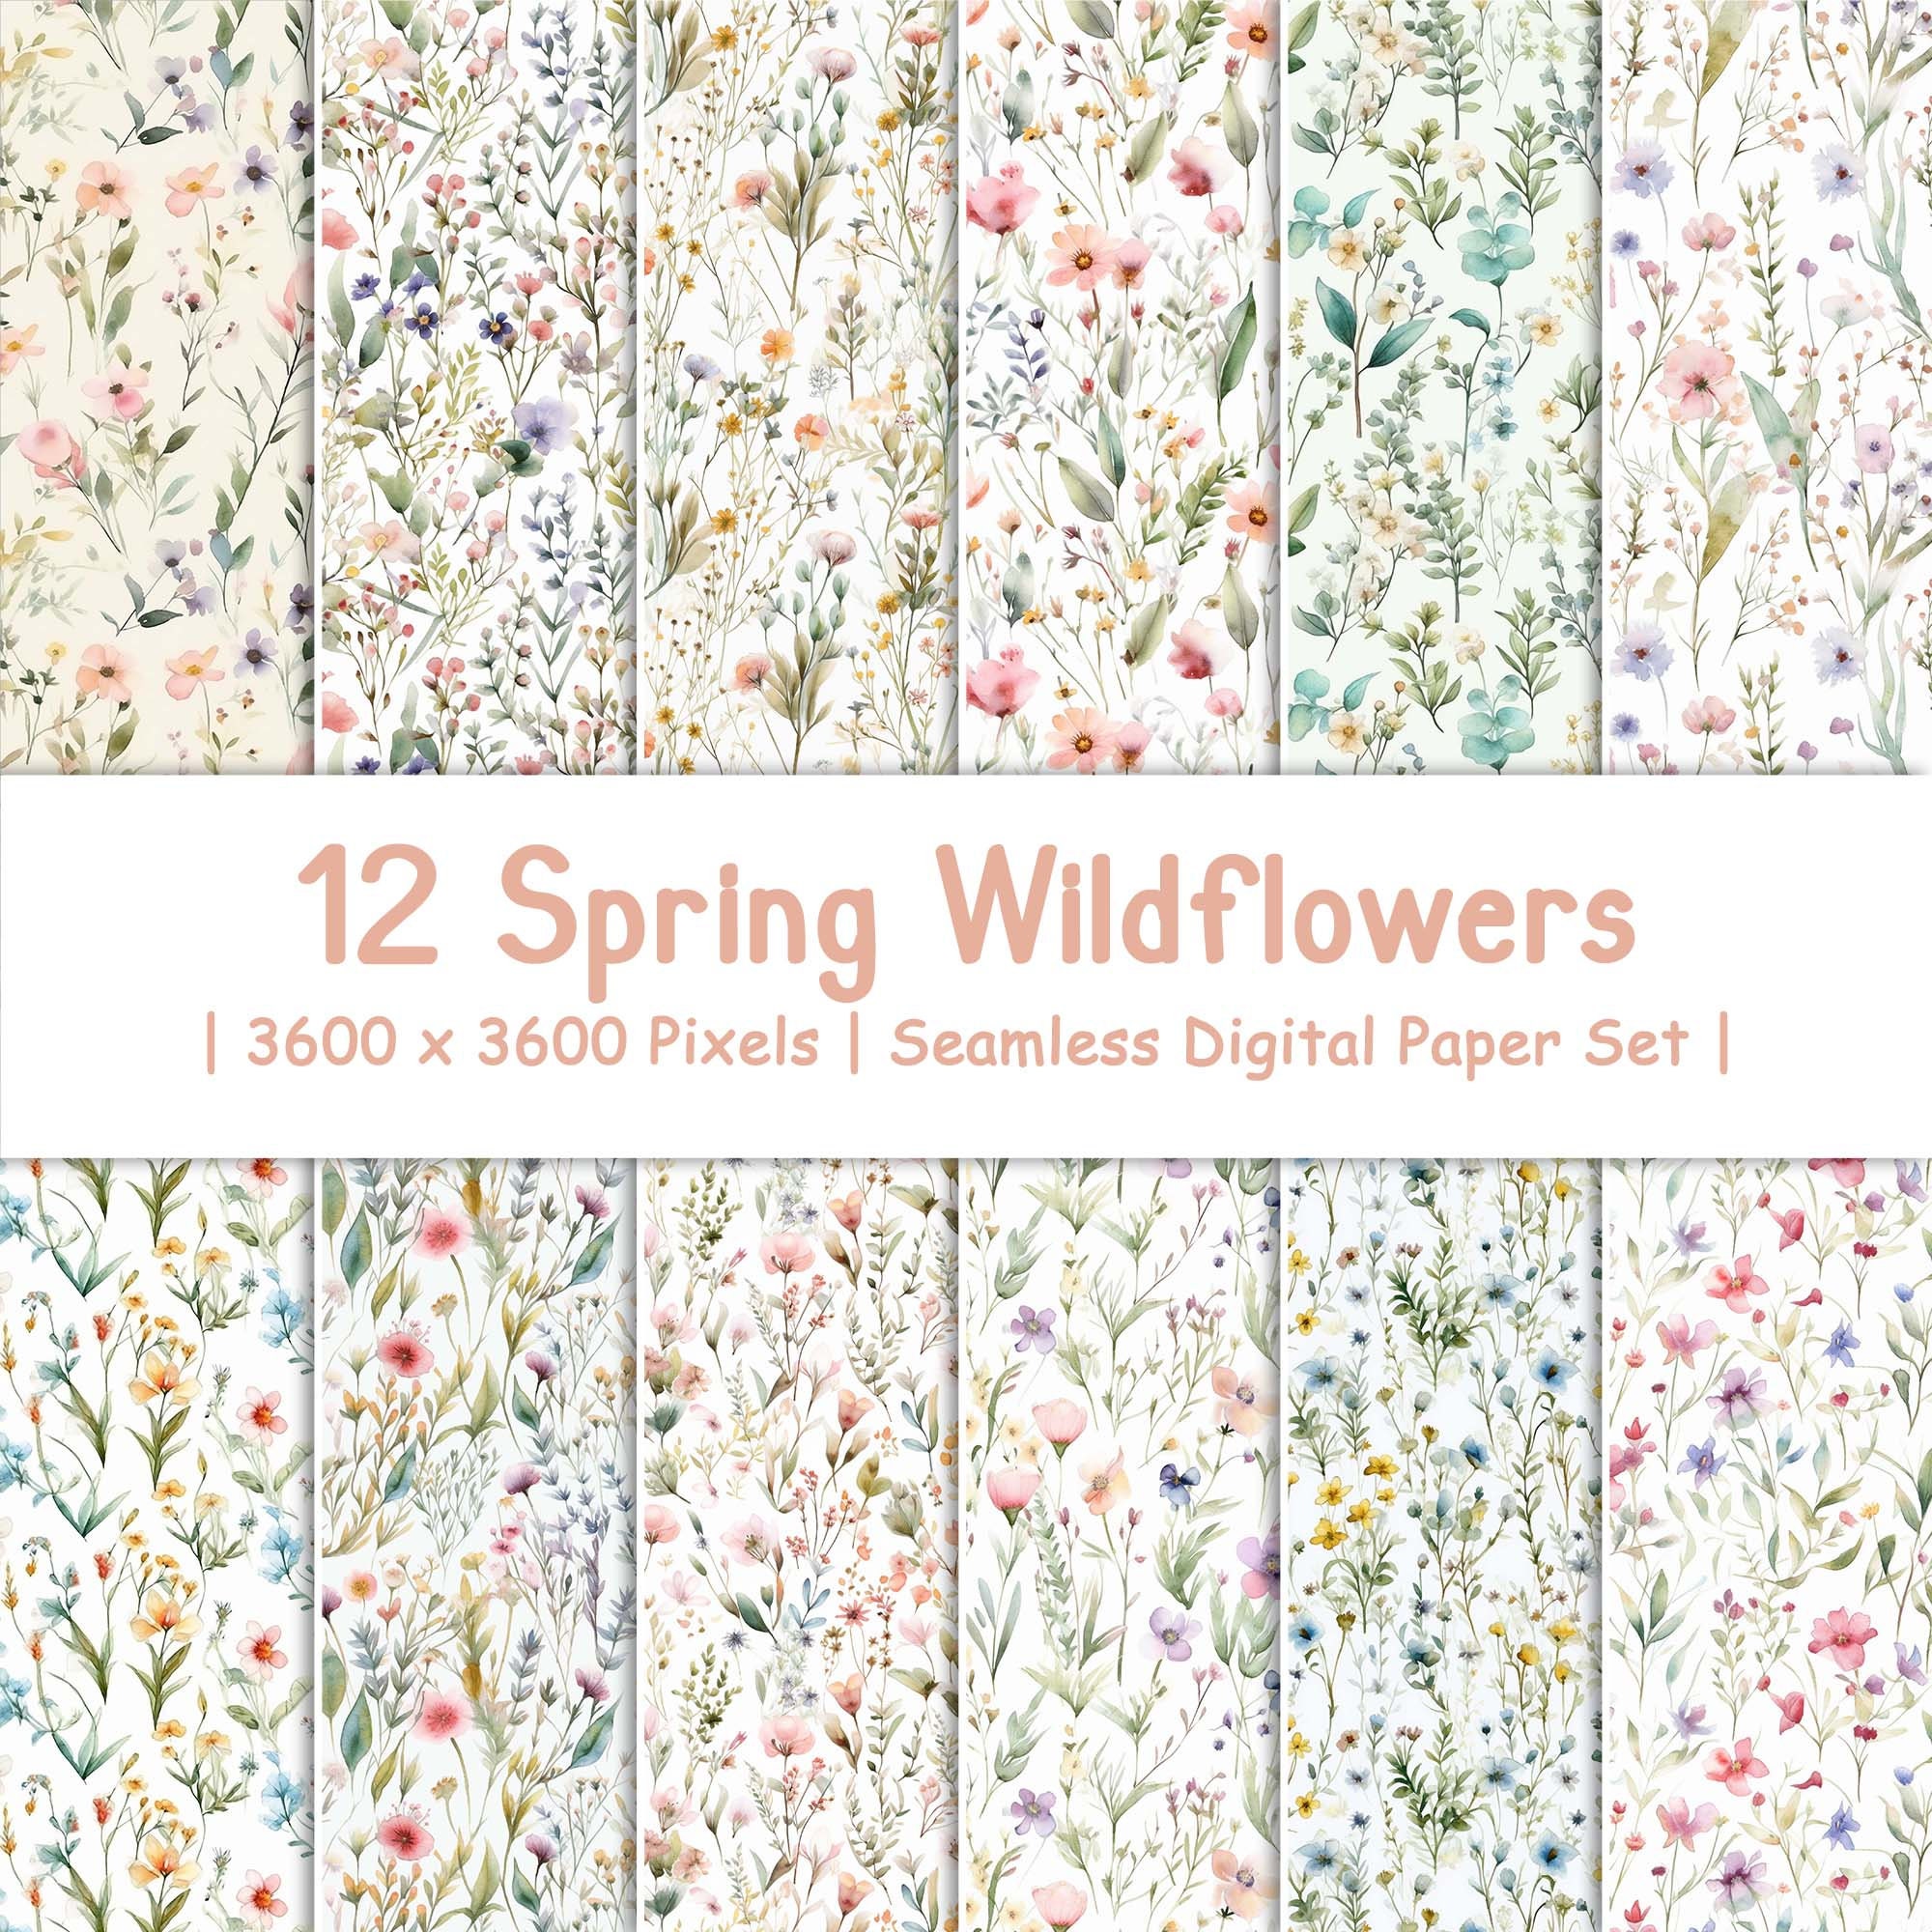 12 Seamless Spring Wildflowers Watercolor Flower Backgrounds - Etsy